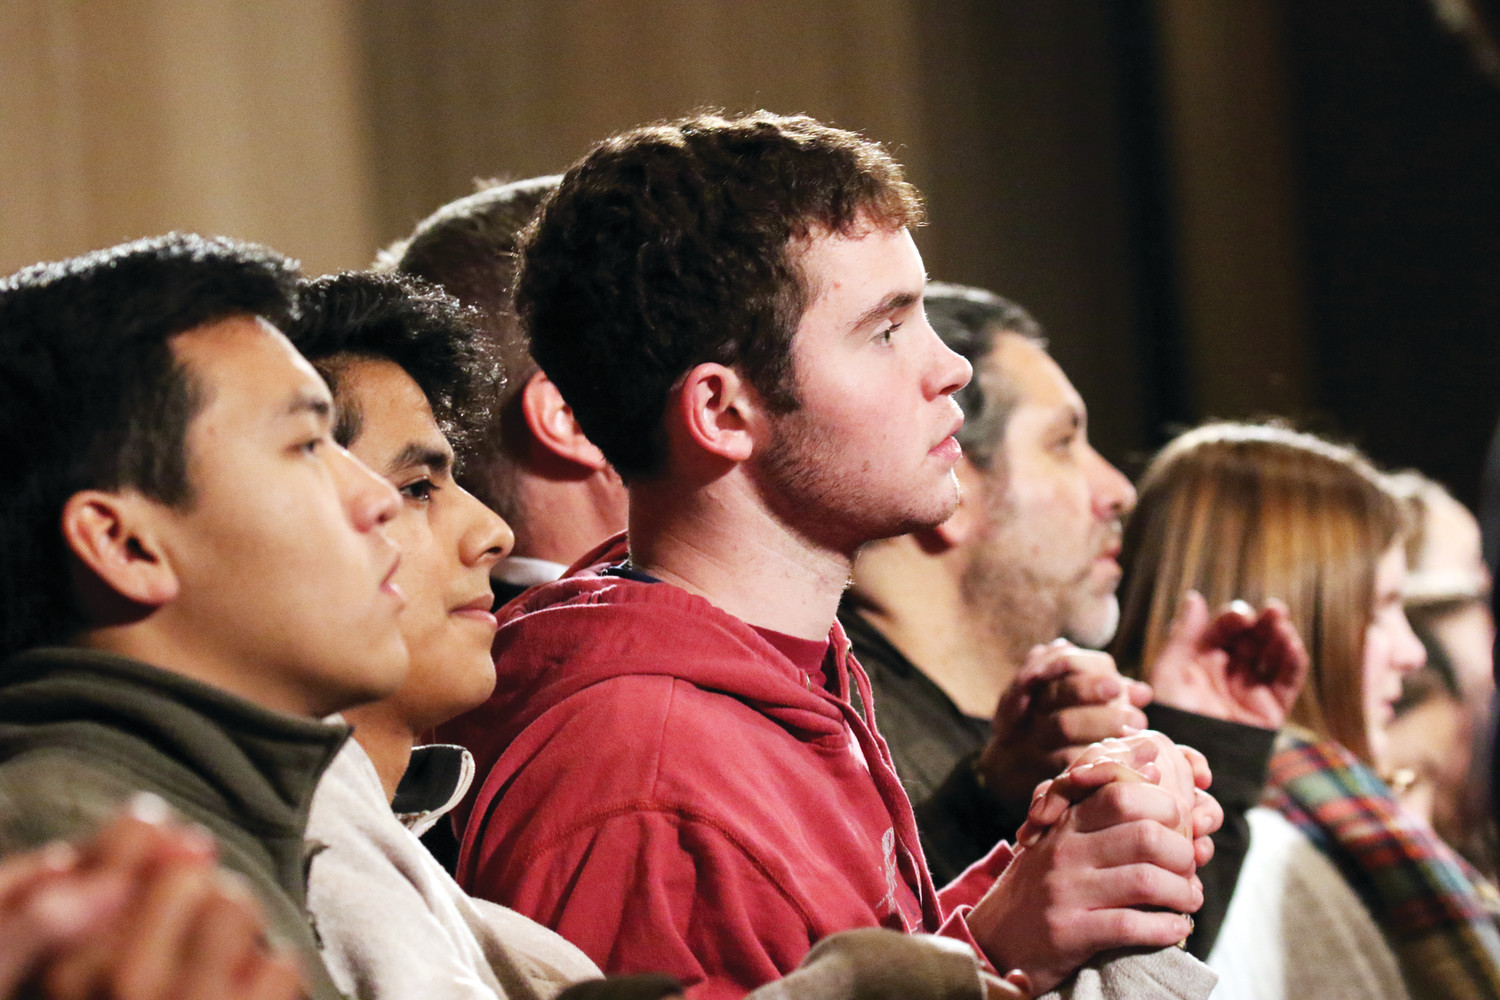 Young people join hands as they pray the Lord’s Prayer during the opening Mass of the National Prayer Vigil for Life at the Basilica of the National Shrine of the Immaculate Conception in Washington, D.C., Jan. 18.